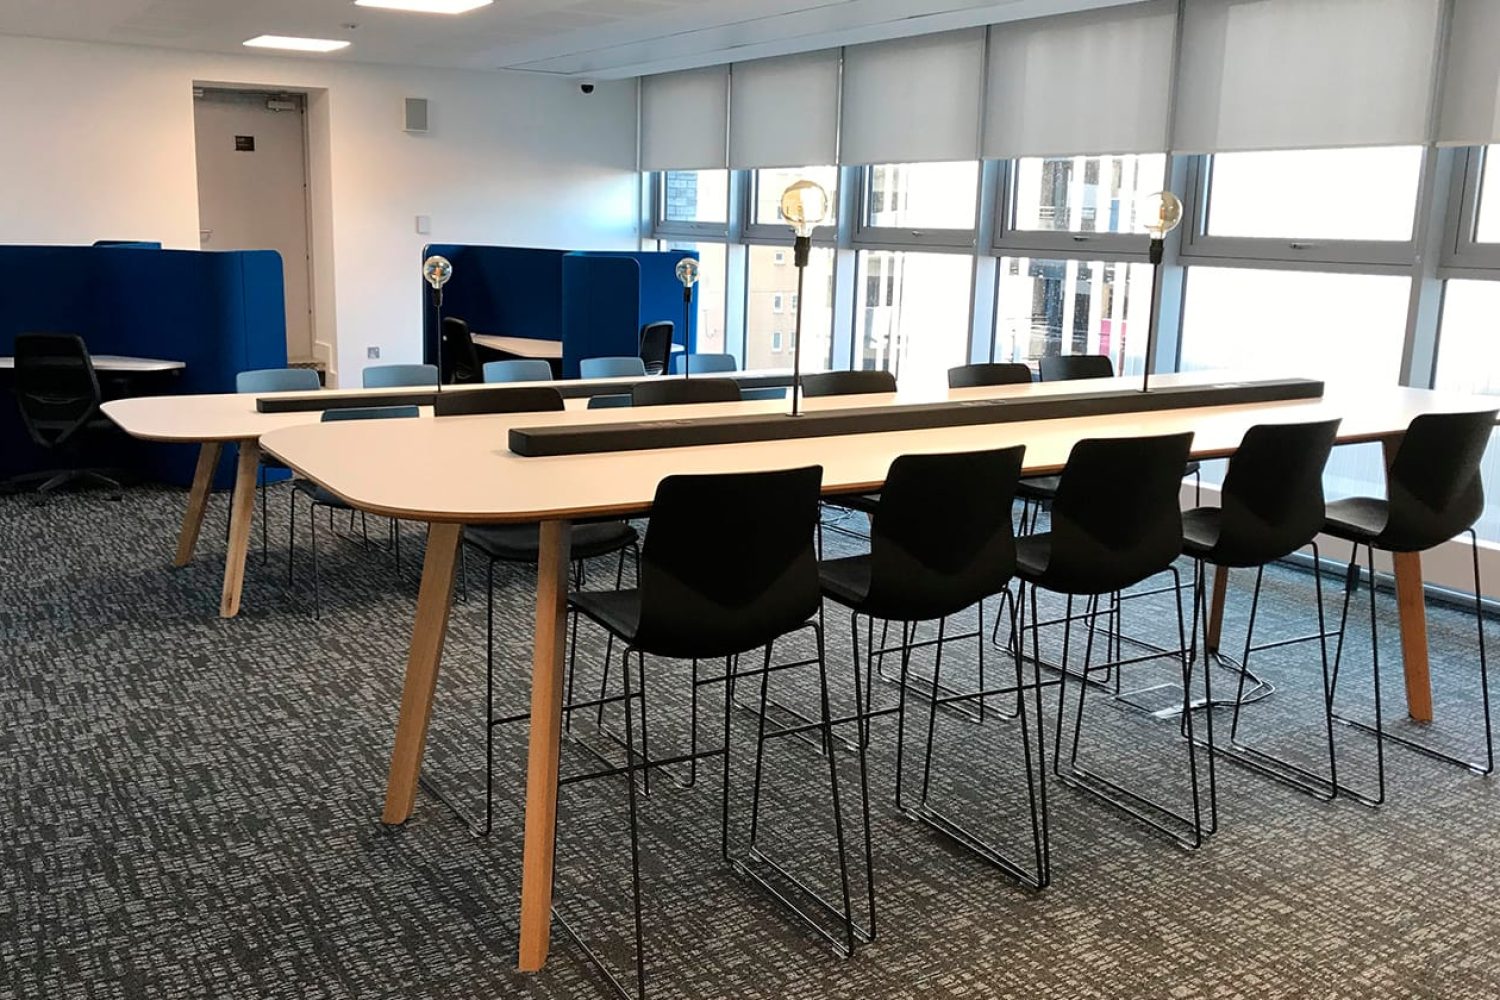 A conference room with a standing height table and counter chairs.